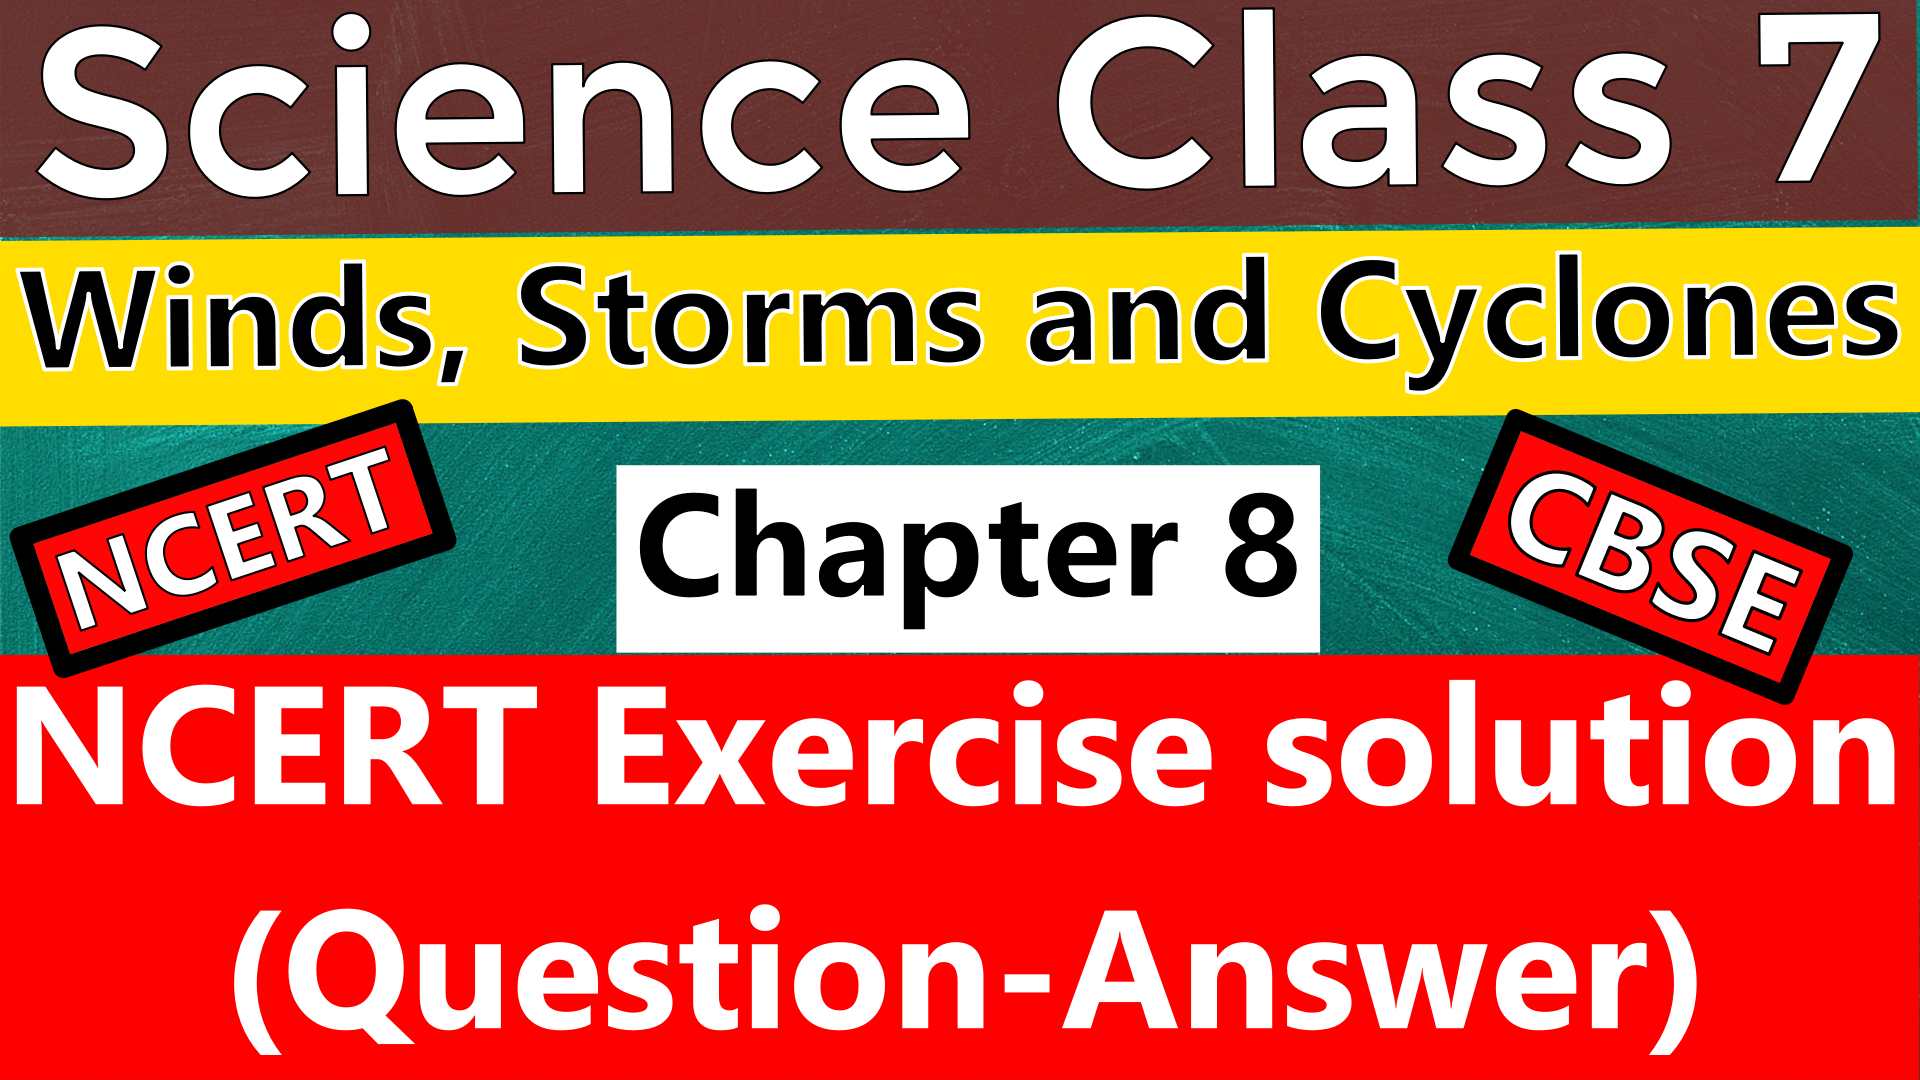 CBSE Science Class 7 - Chapter 8 -Winds, Storms and Cyclones - NCERT Exercise Solution (Question-Answer) is provided below. Total 9 Questions are in this NCERT Chapter Exercise, all are solved here.